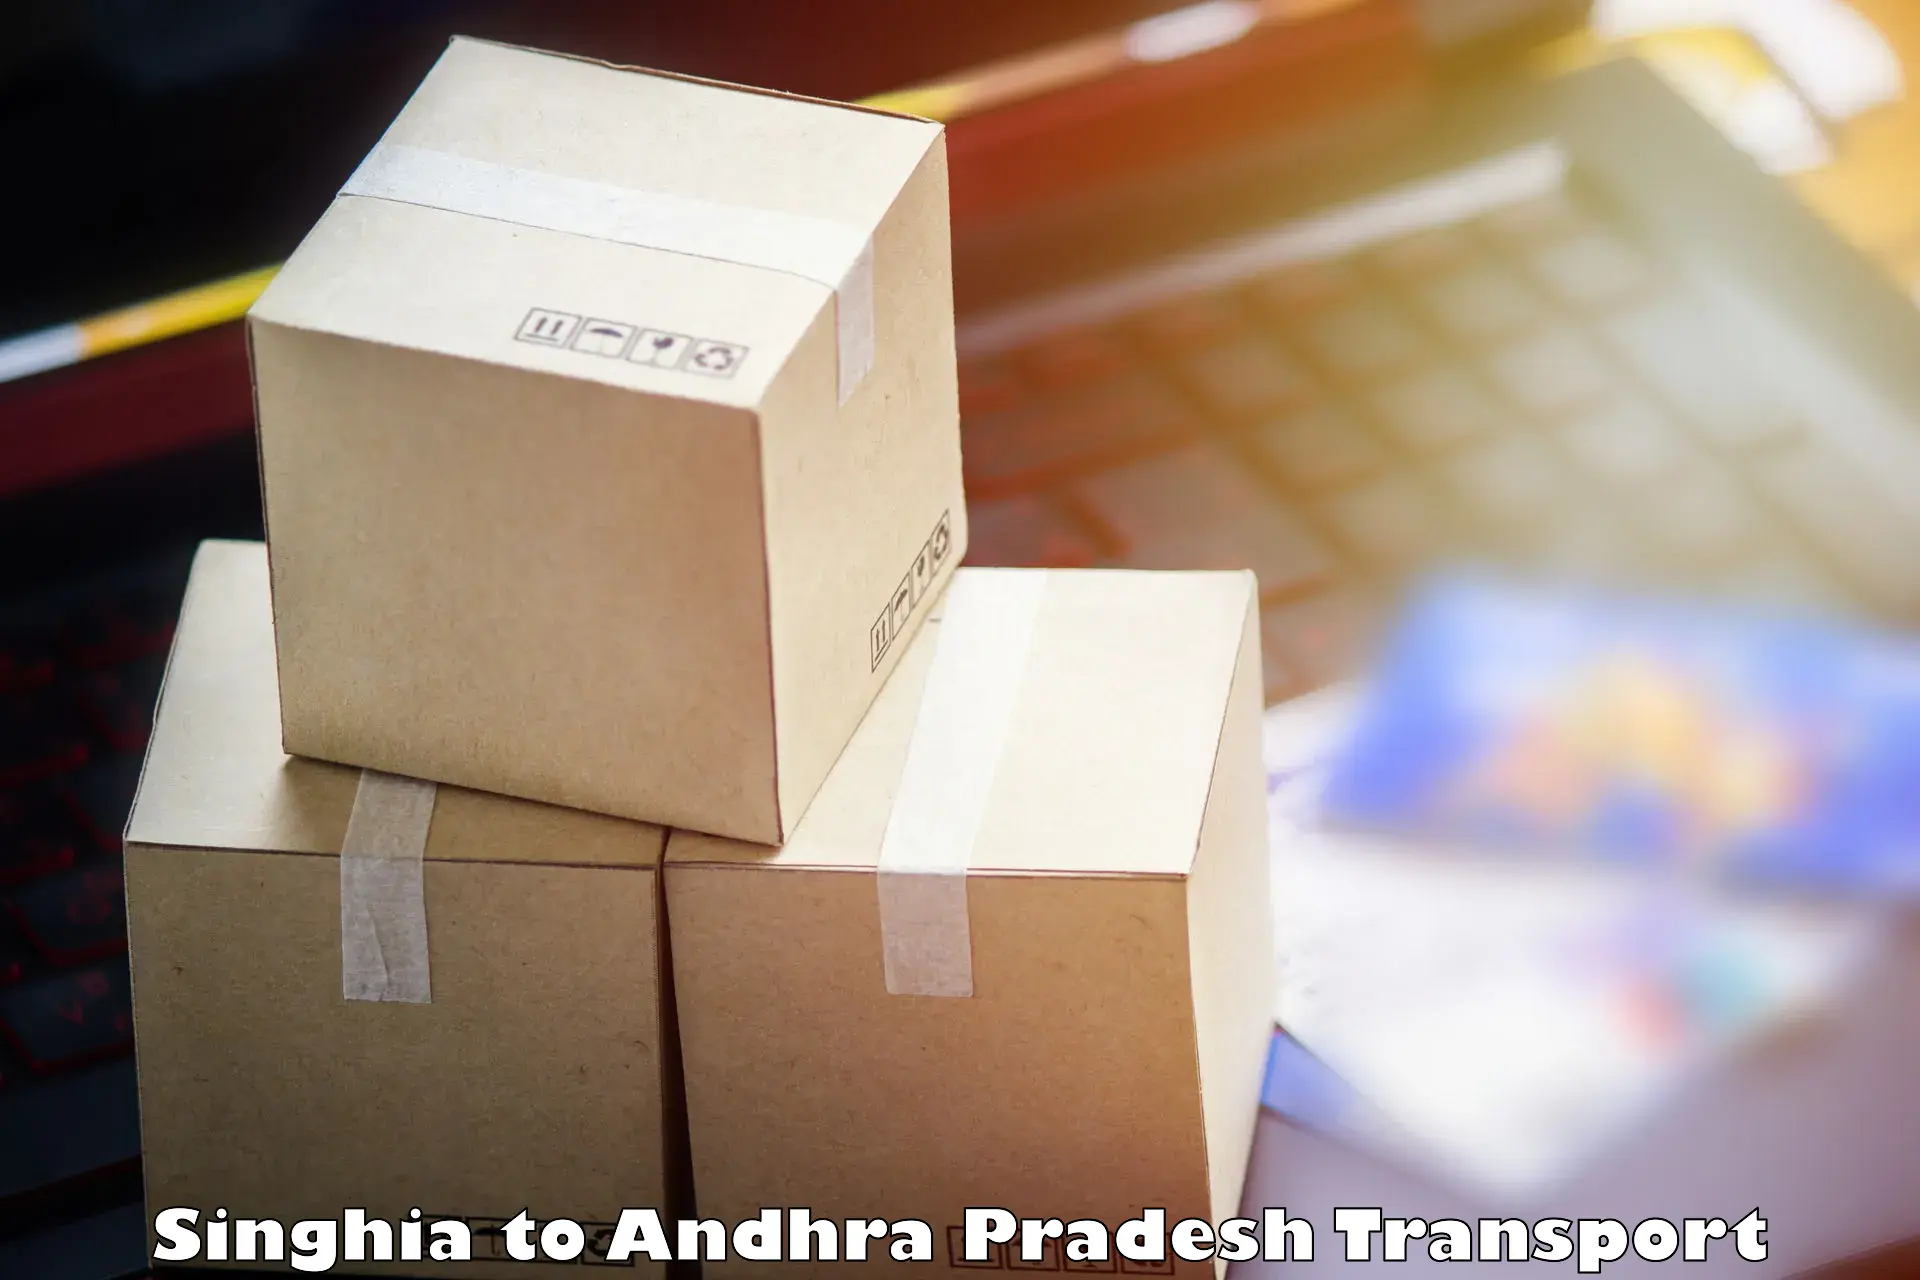 Land transport services in Singhia to Kurnool